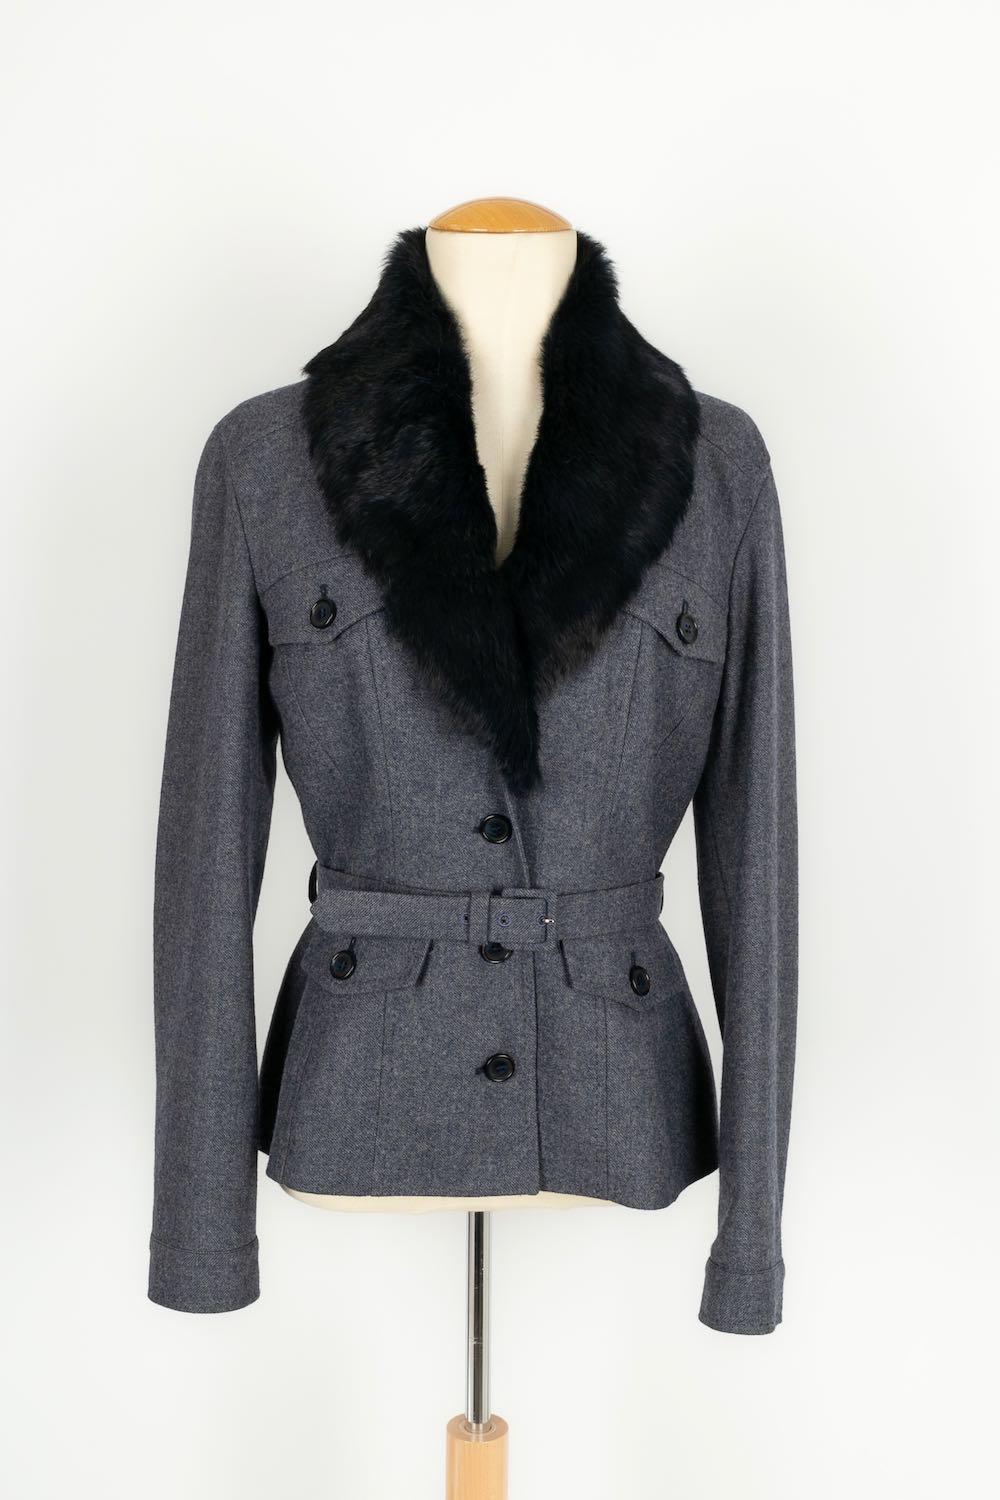 Alexander McQueen Jacket, Skirt and Wool Pants 3 Pieces Set For Sale 14